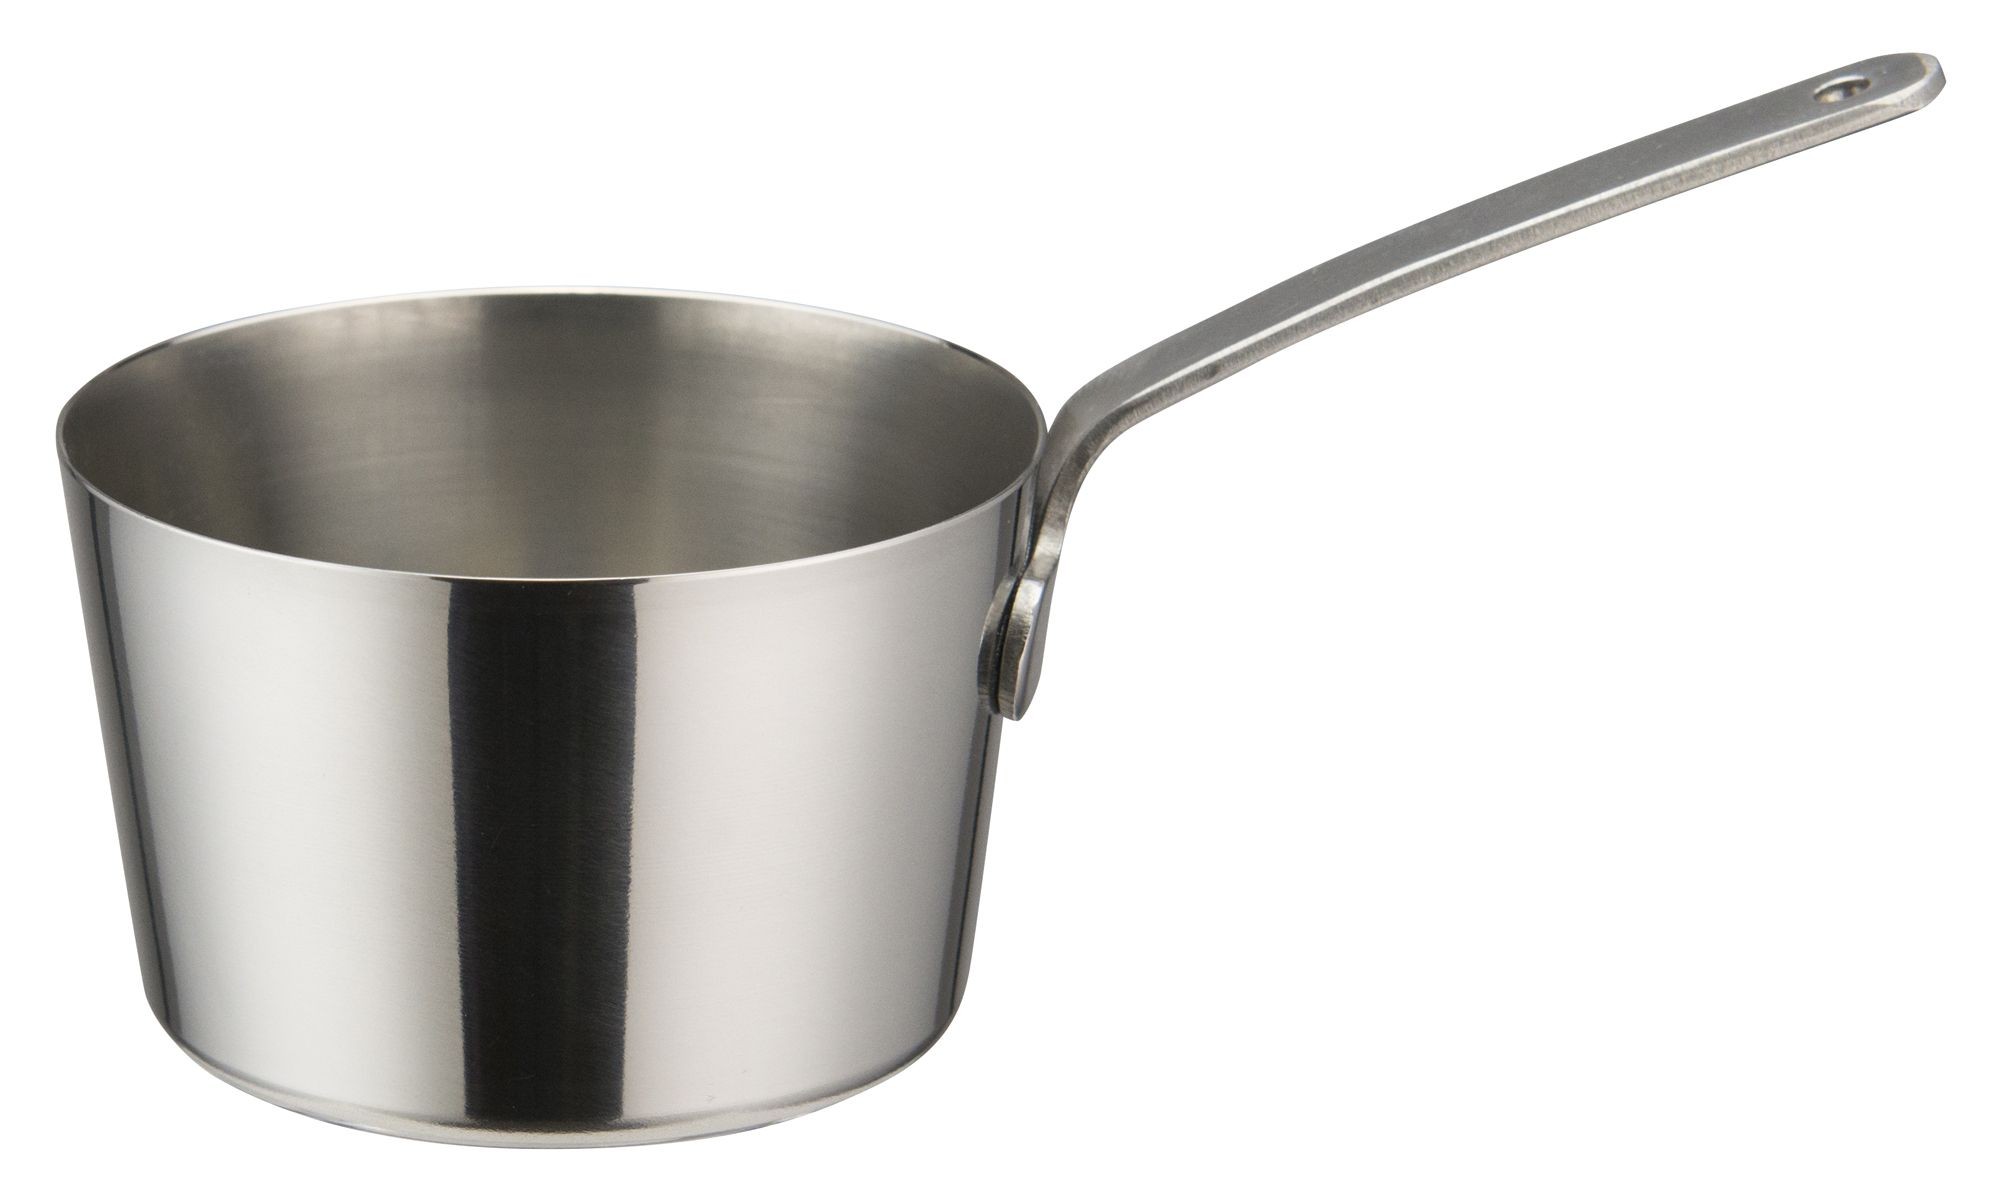 Winco DCWB-101S Stainless Steel 2-3/4" Dia x 1-3/4" H Mini Tapered Sauce Pan